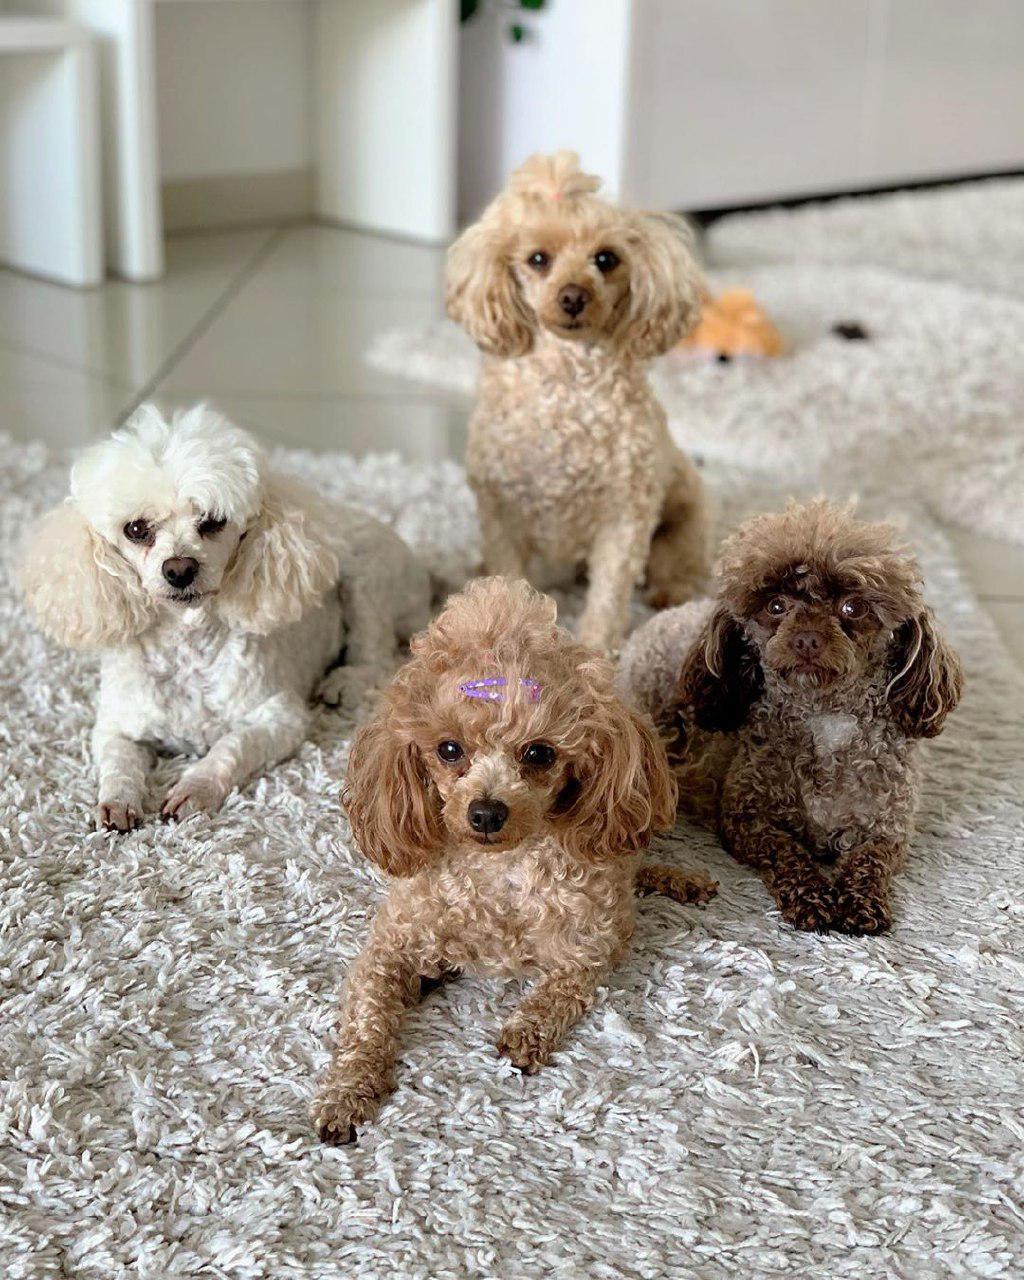 four Poodles in white, cream, apricot, and brown colors on the carpet